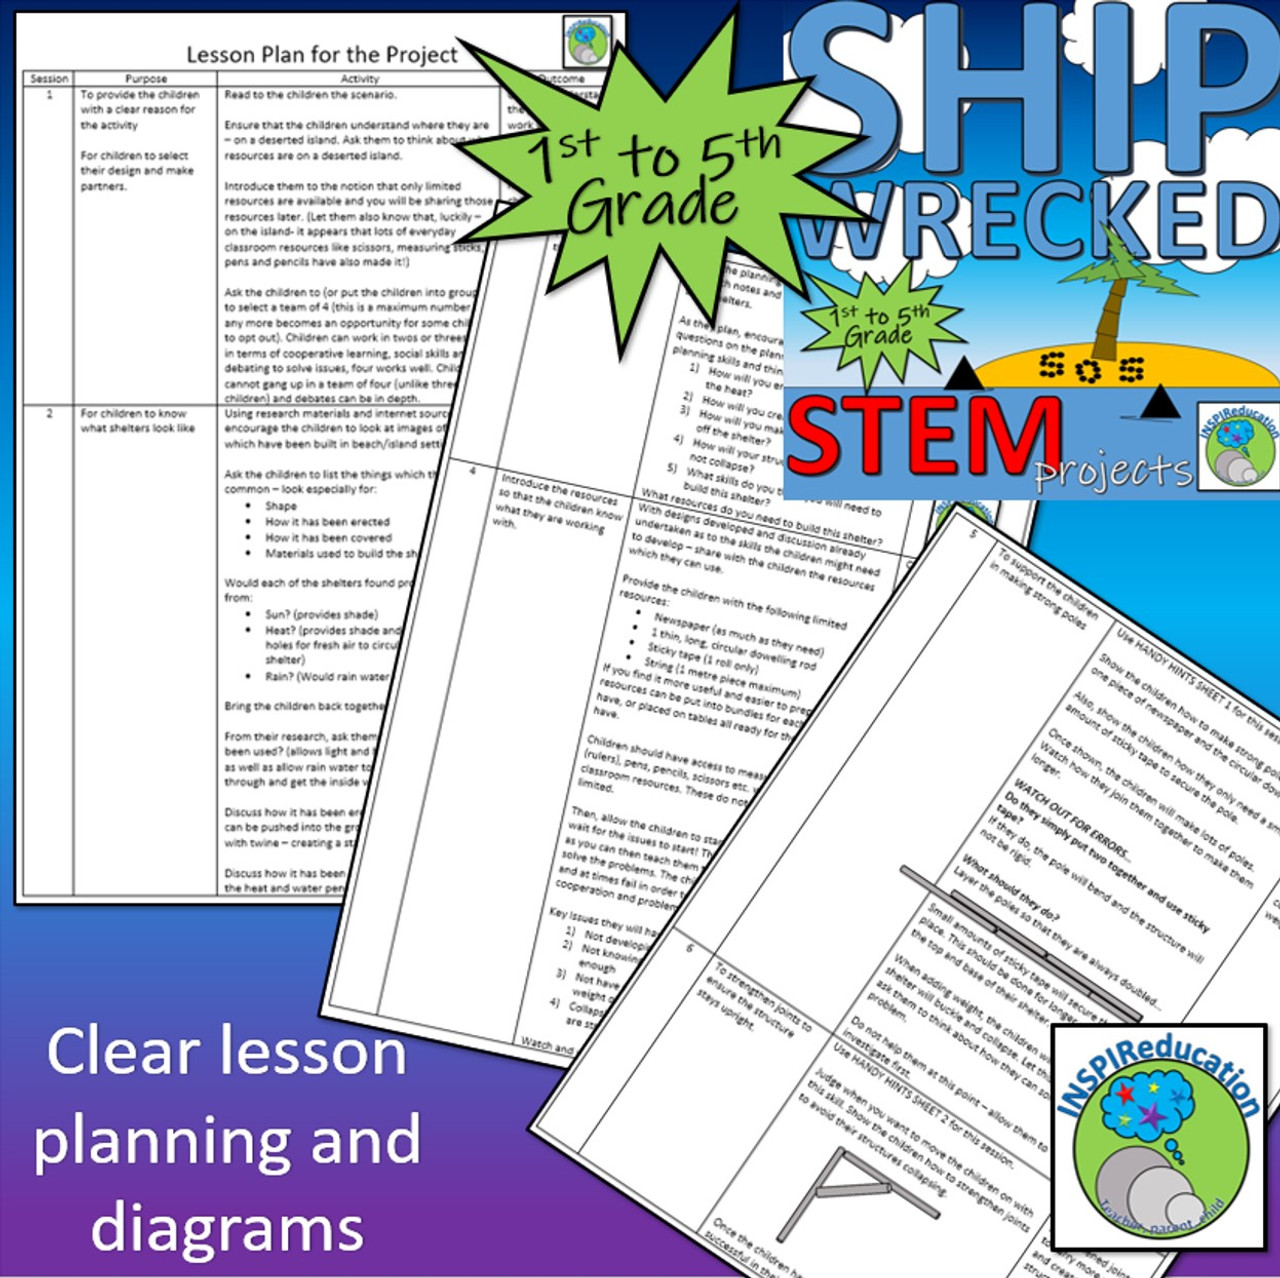 STEM: Structures in context - Shipwrecked Shelters, Lesson Plans, Hints and Certificate